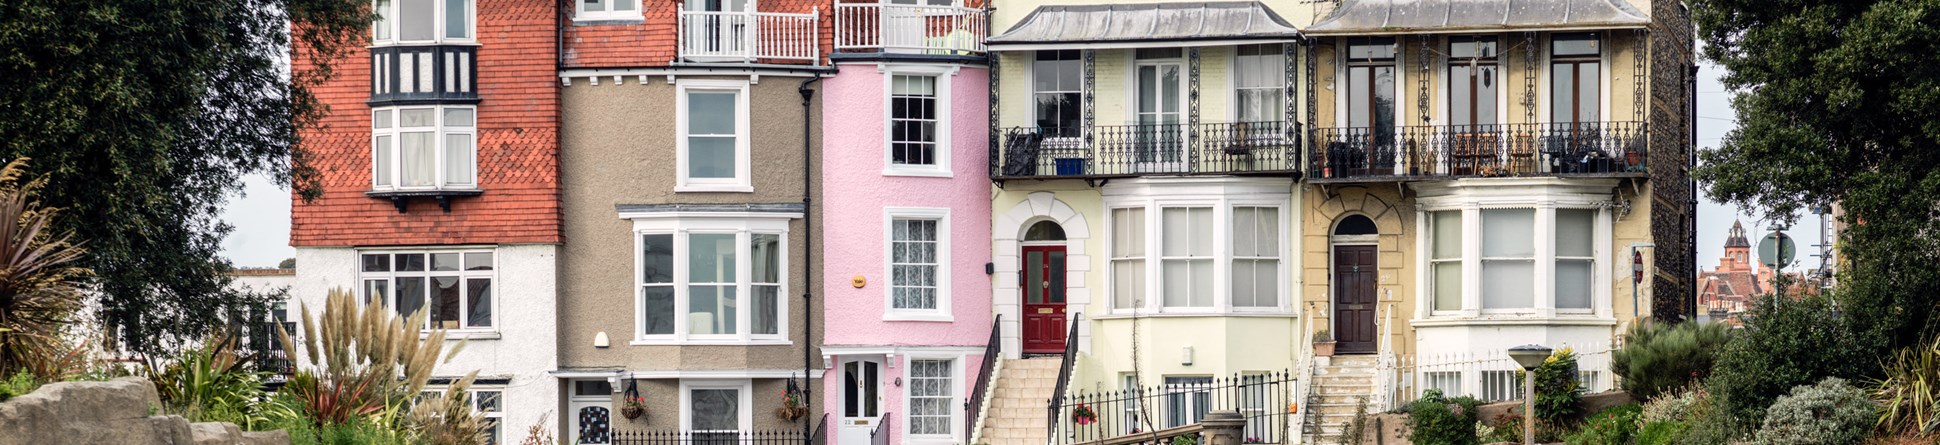 Some of Ramsgate's colourful houses